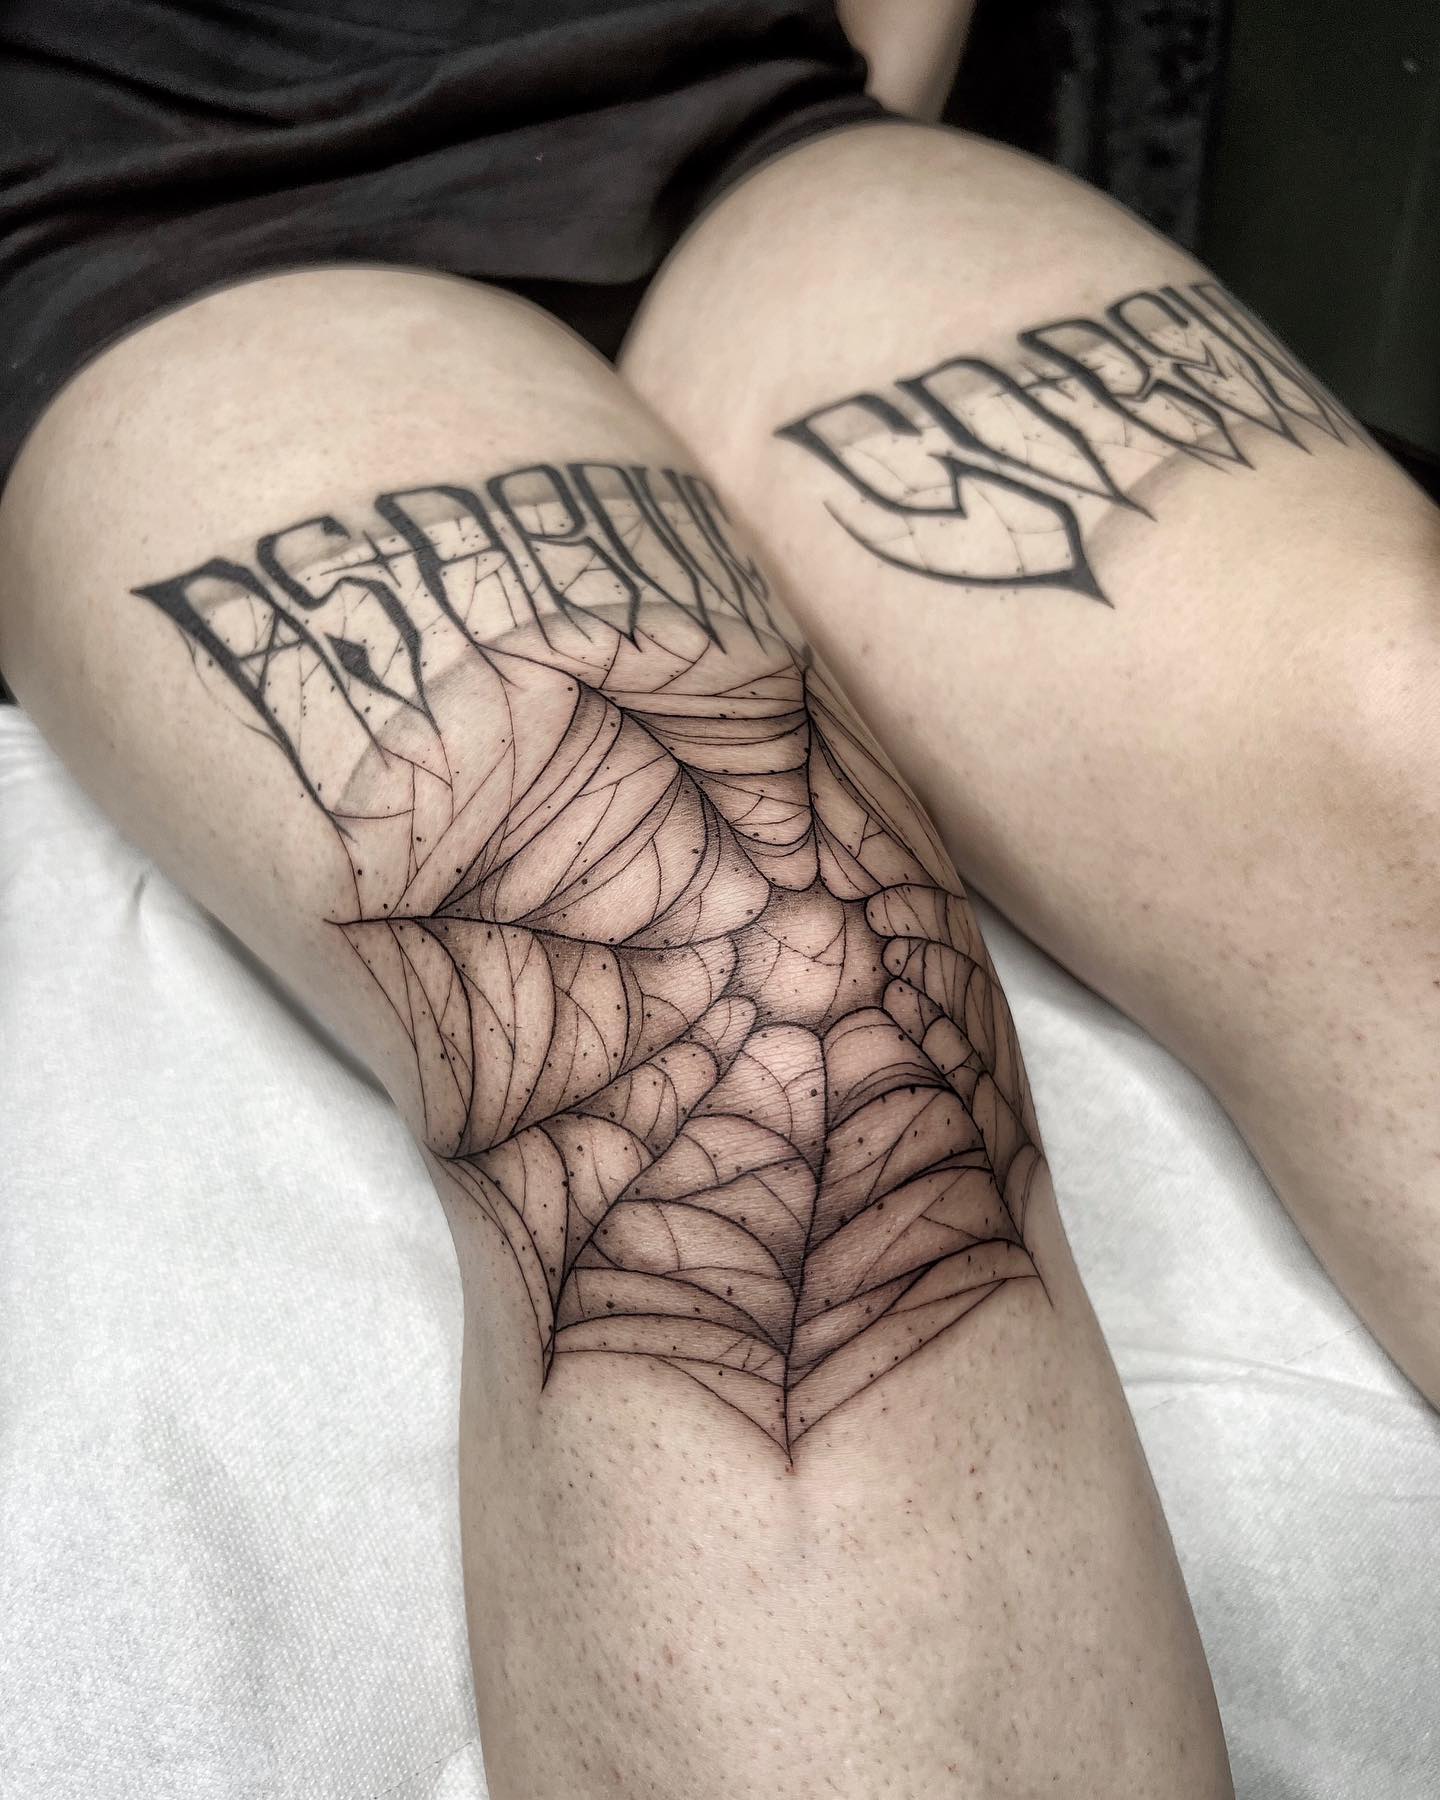 Cool thigh tattoo that stands for bold and attractive men. Guys who work out and those who can conquer pretty much anything will fancy this design.